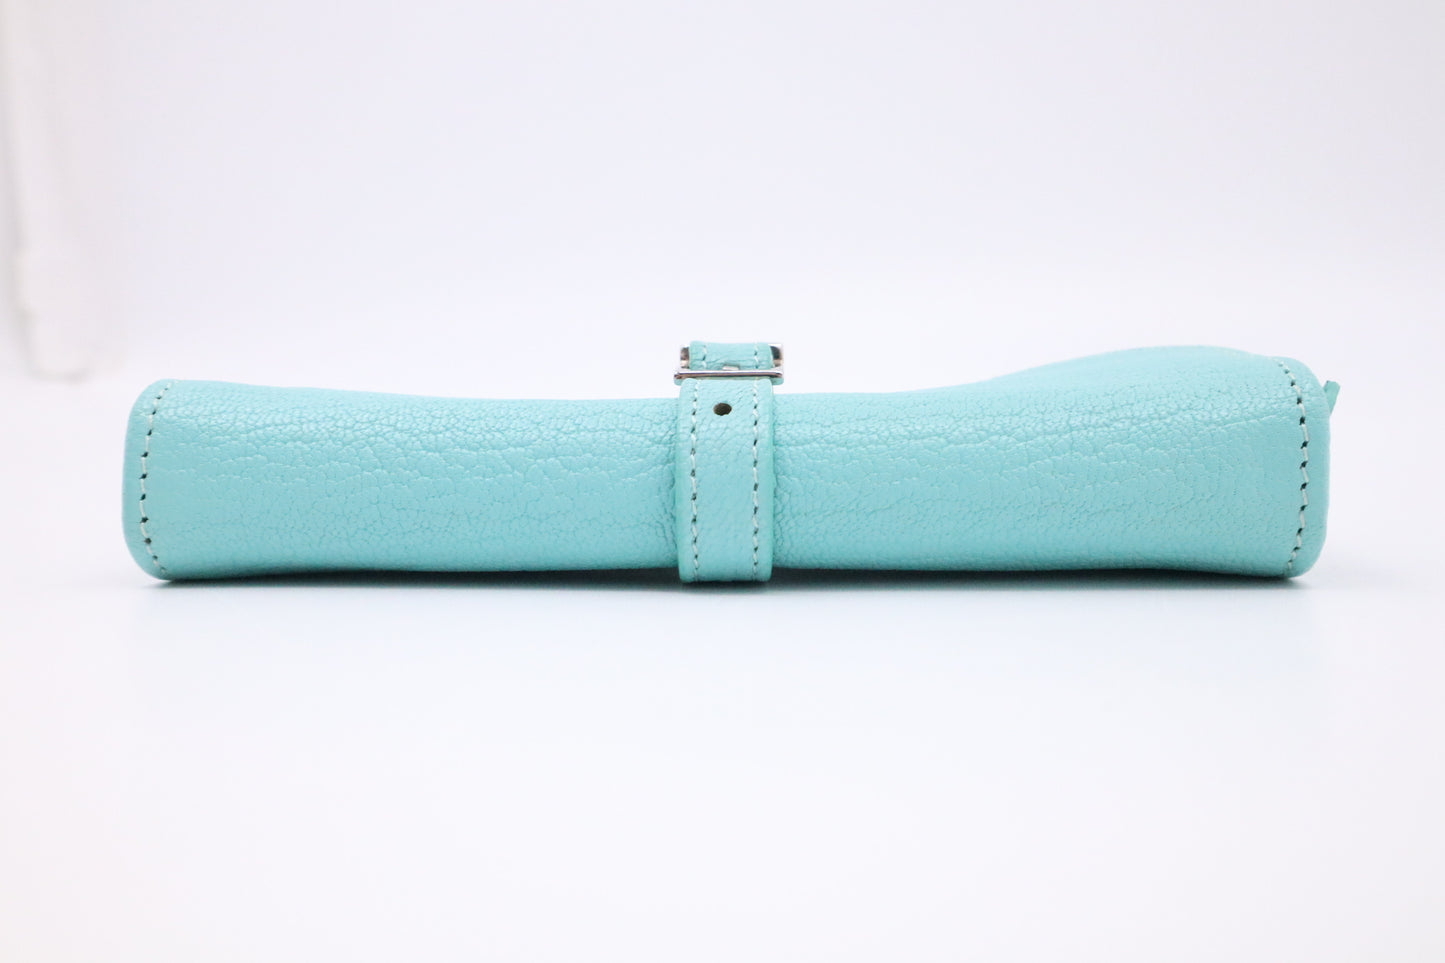 Tiffany&Co. Accessory Case in Tiffany Blue Leather